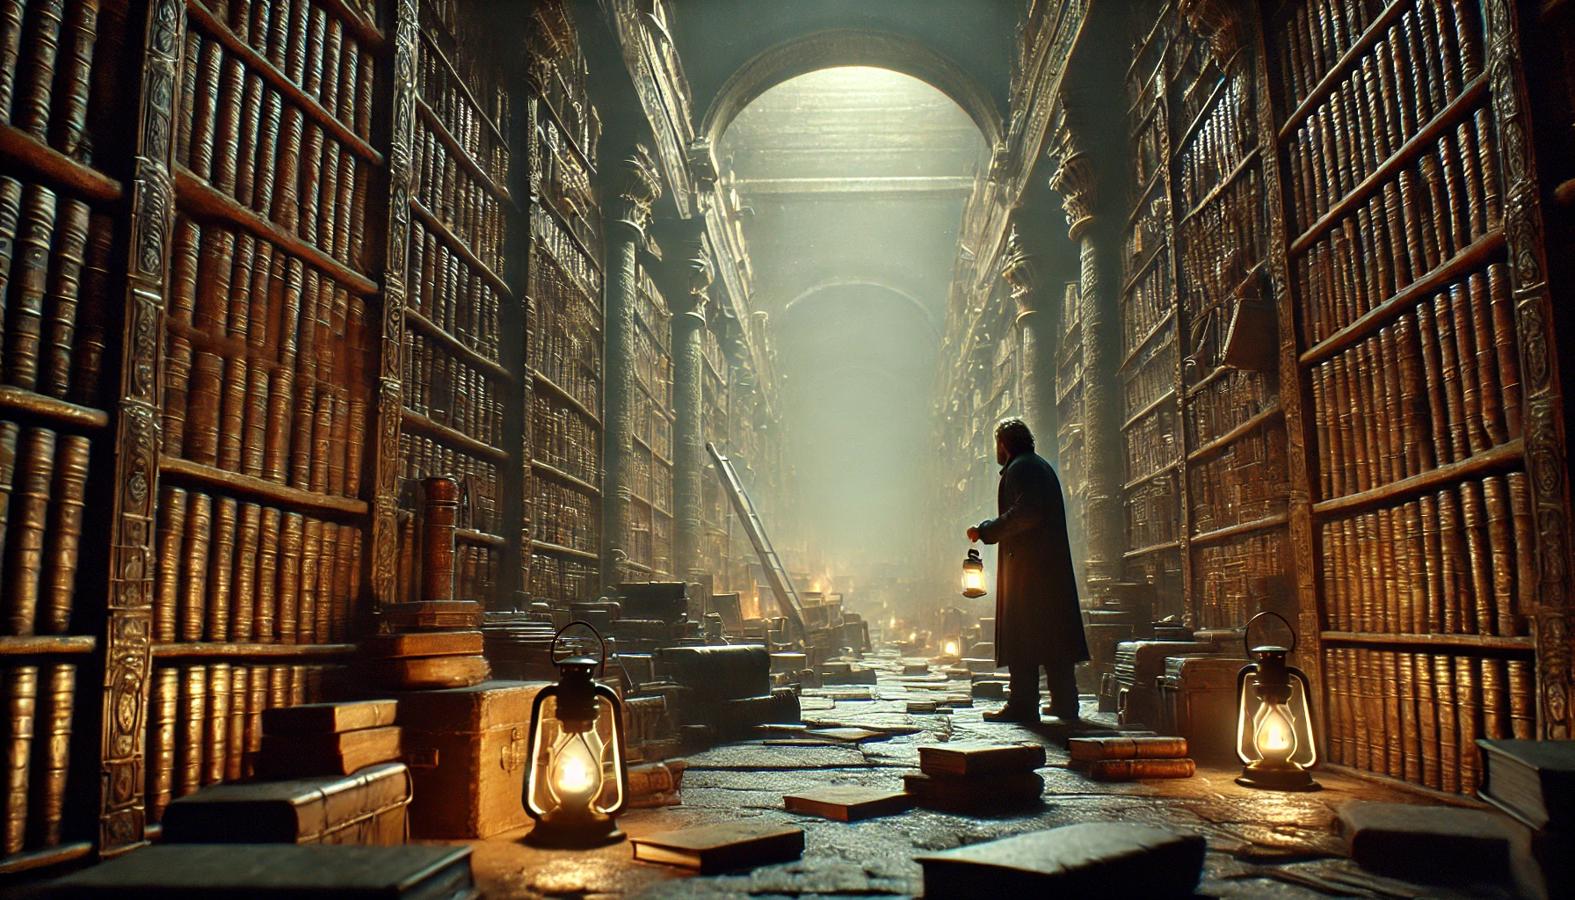 Edgar discovering a hidden underground library filled with ancient books and scrolls, dimly lit by scattered lanterns.